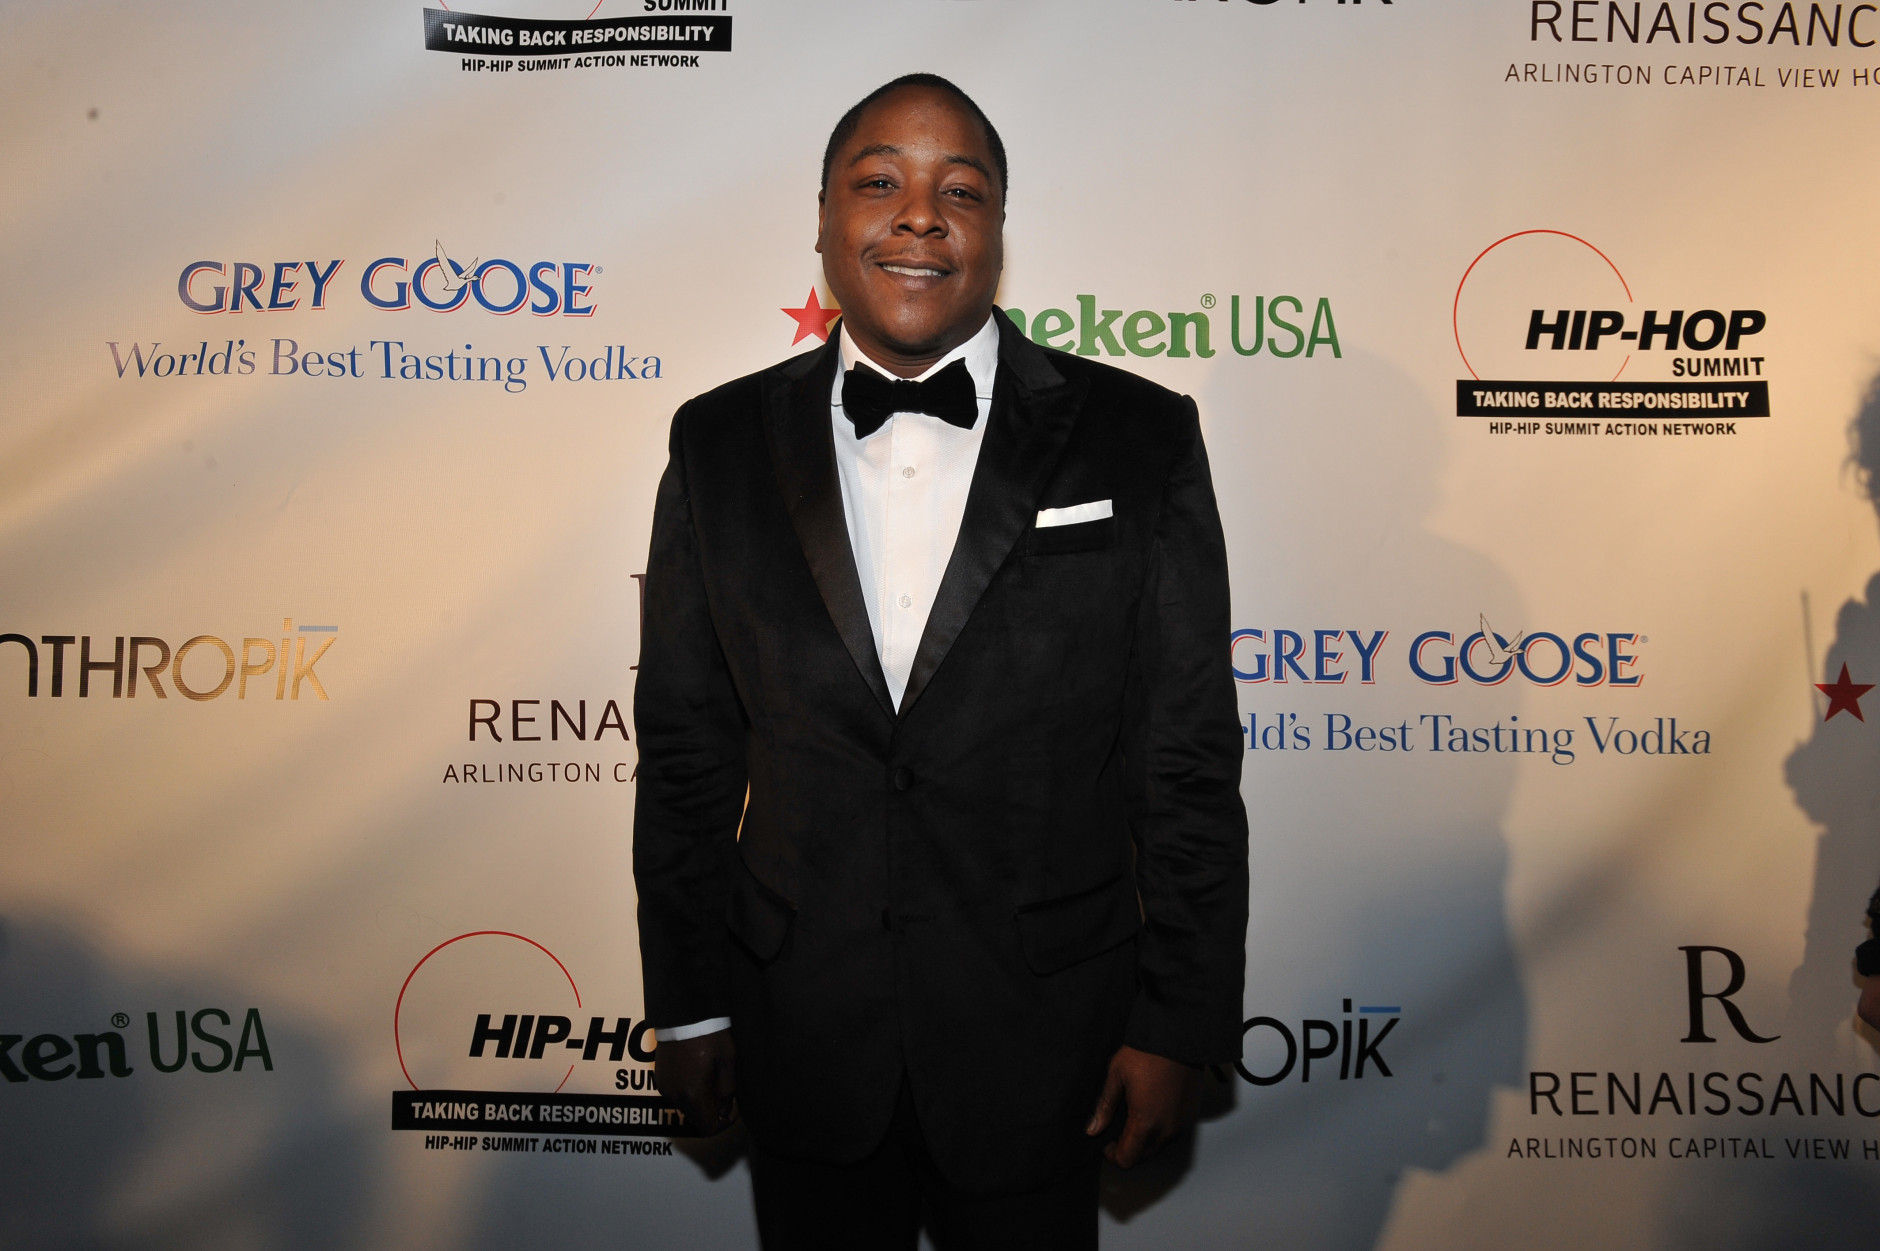 Jadakiss is seen at the Hip-Hop Inaugural Ball on Sunday, Jan. 20 in Washington. (Photo by Larry French/Invision/AP)